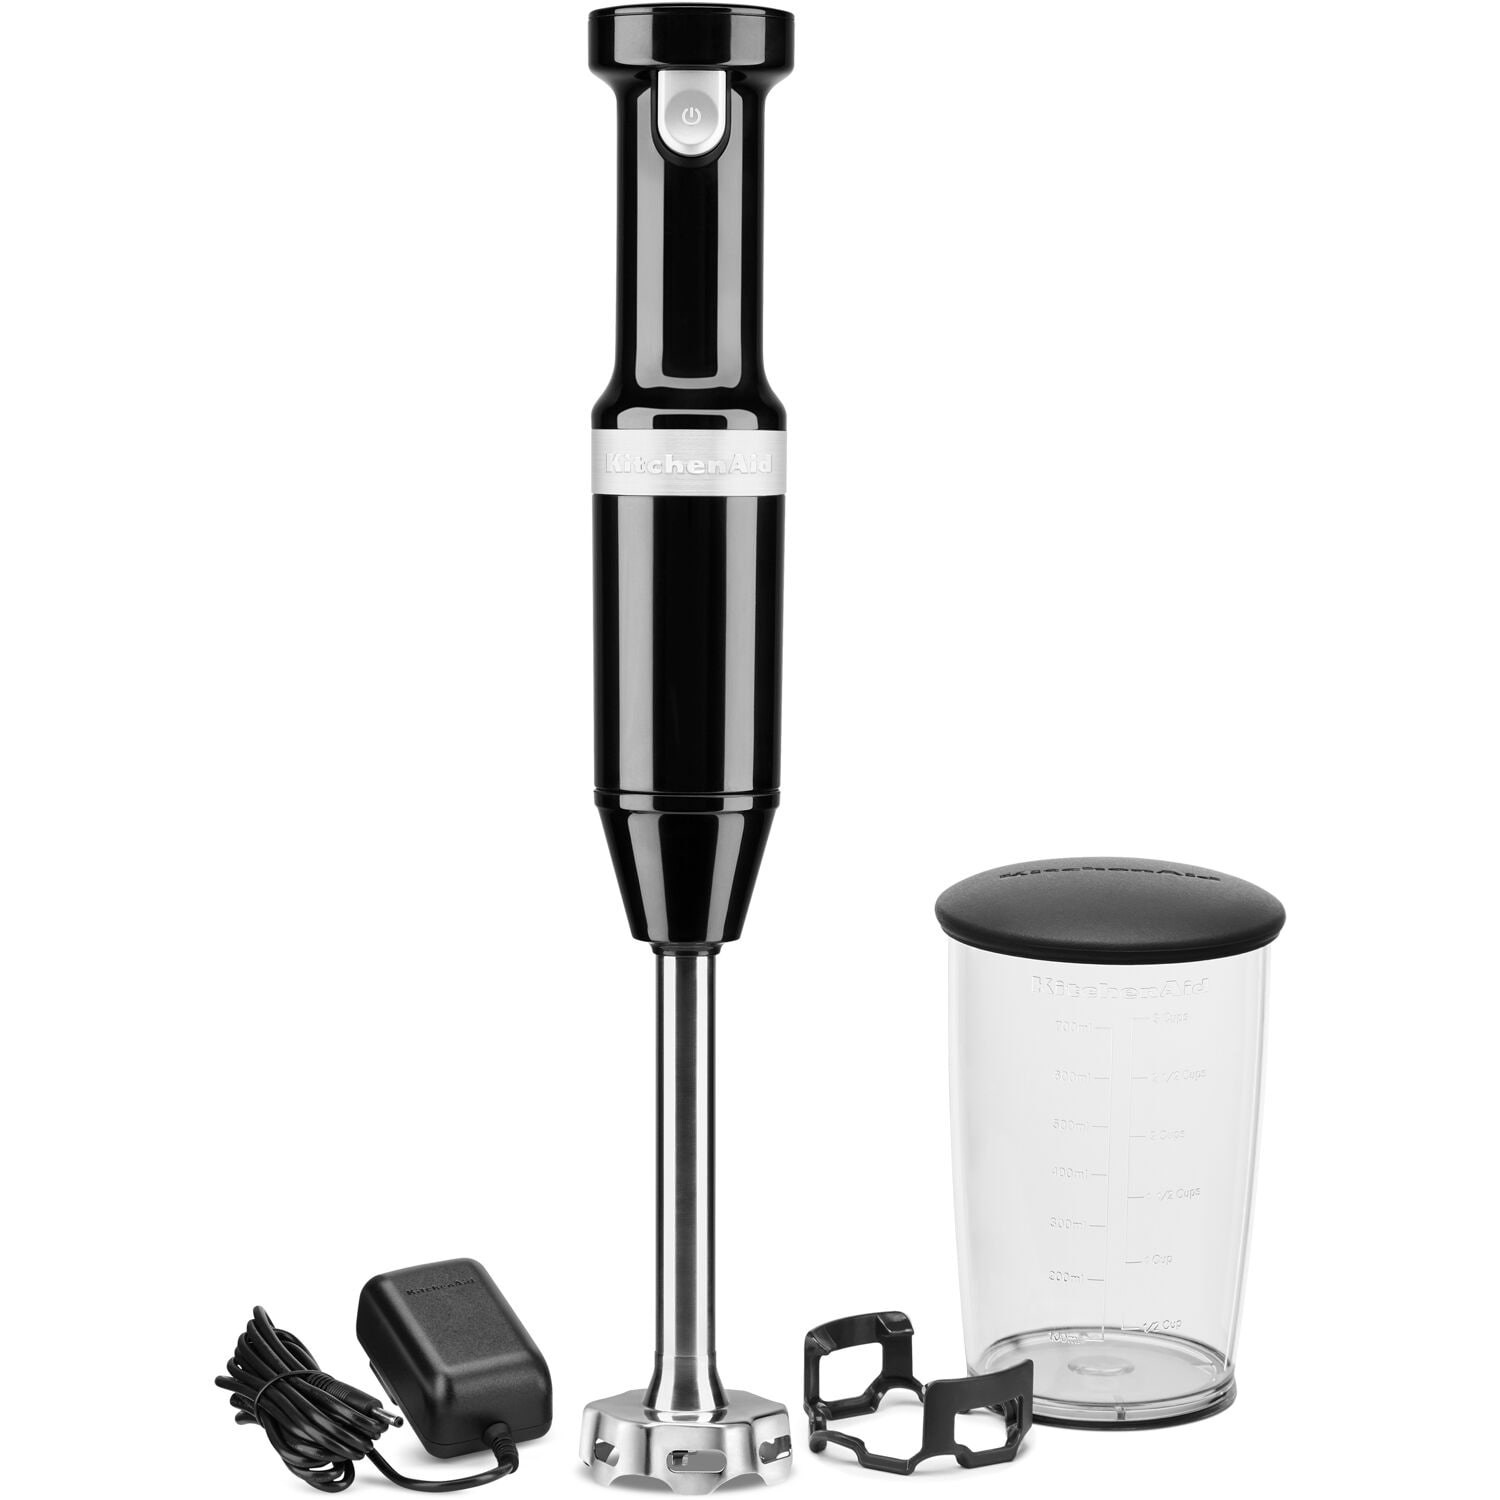 https://ak1.ostkcdn.com/images/products/is/images/direct/6fb334c89e4a0e808ed6b4d1a56892cc7a21e125/KitchenAid-Cordless-Variable-Speed-Immersion-Blender-in-Onyx-Black-with-Whisk-and-Blending-Jar.jpg